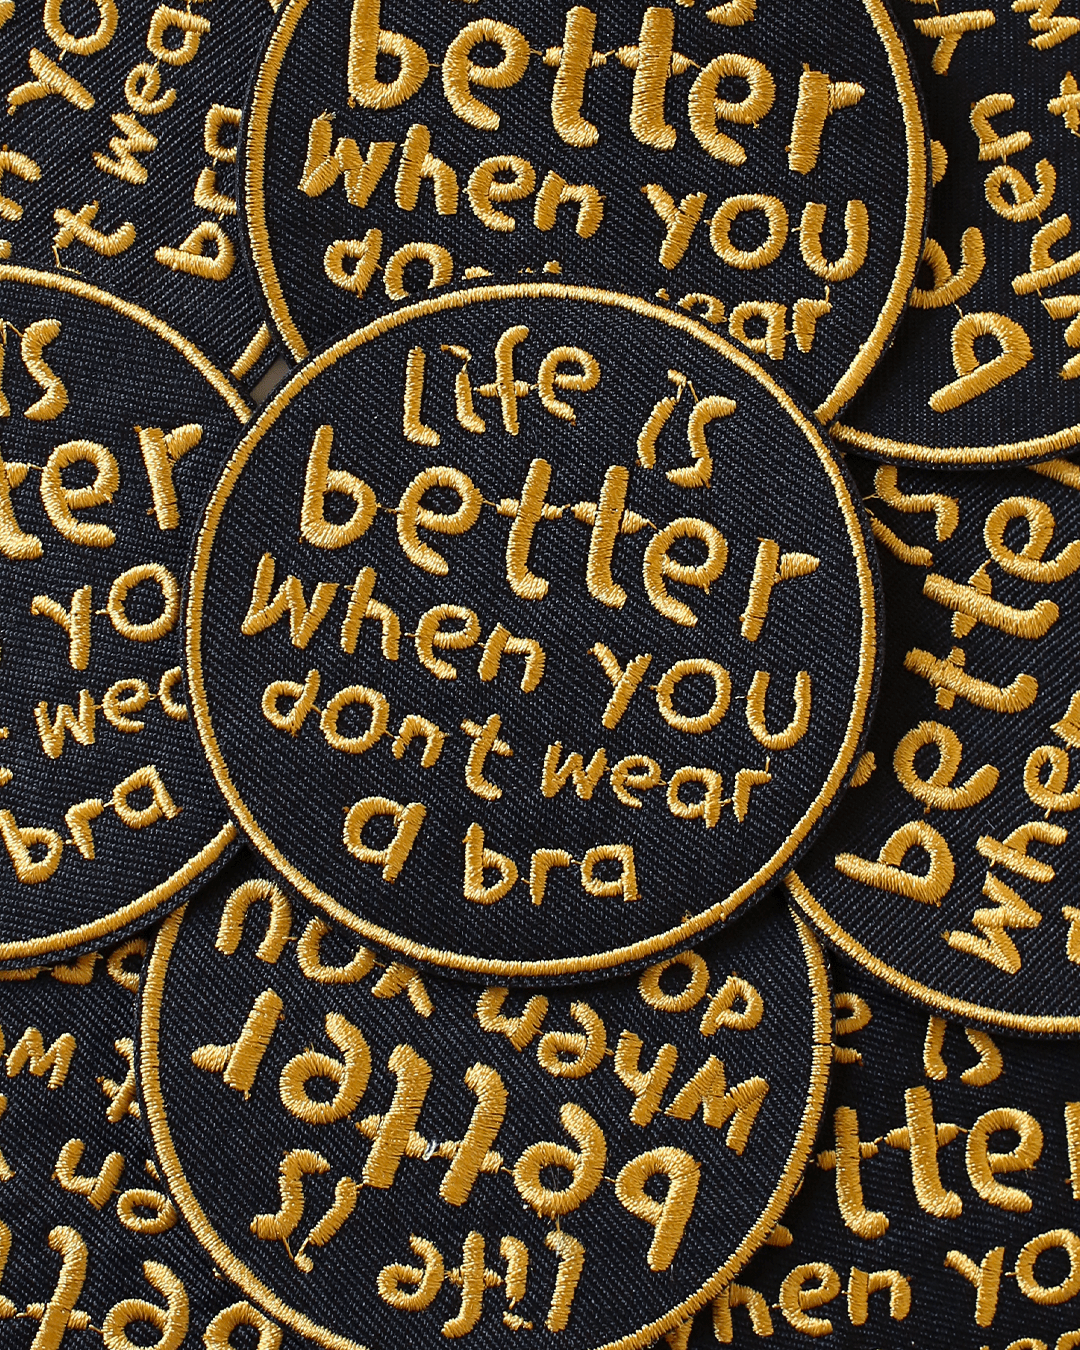 Life Is Better When You Don't Wear A Bra Patch - Funny Feminist Embroidered Iron On Clothes - Funny Feminist Patch